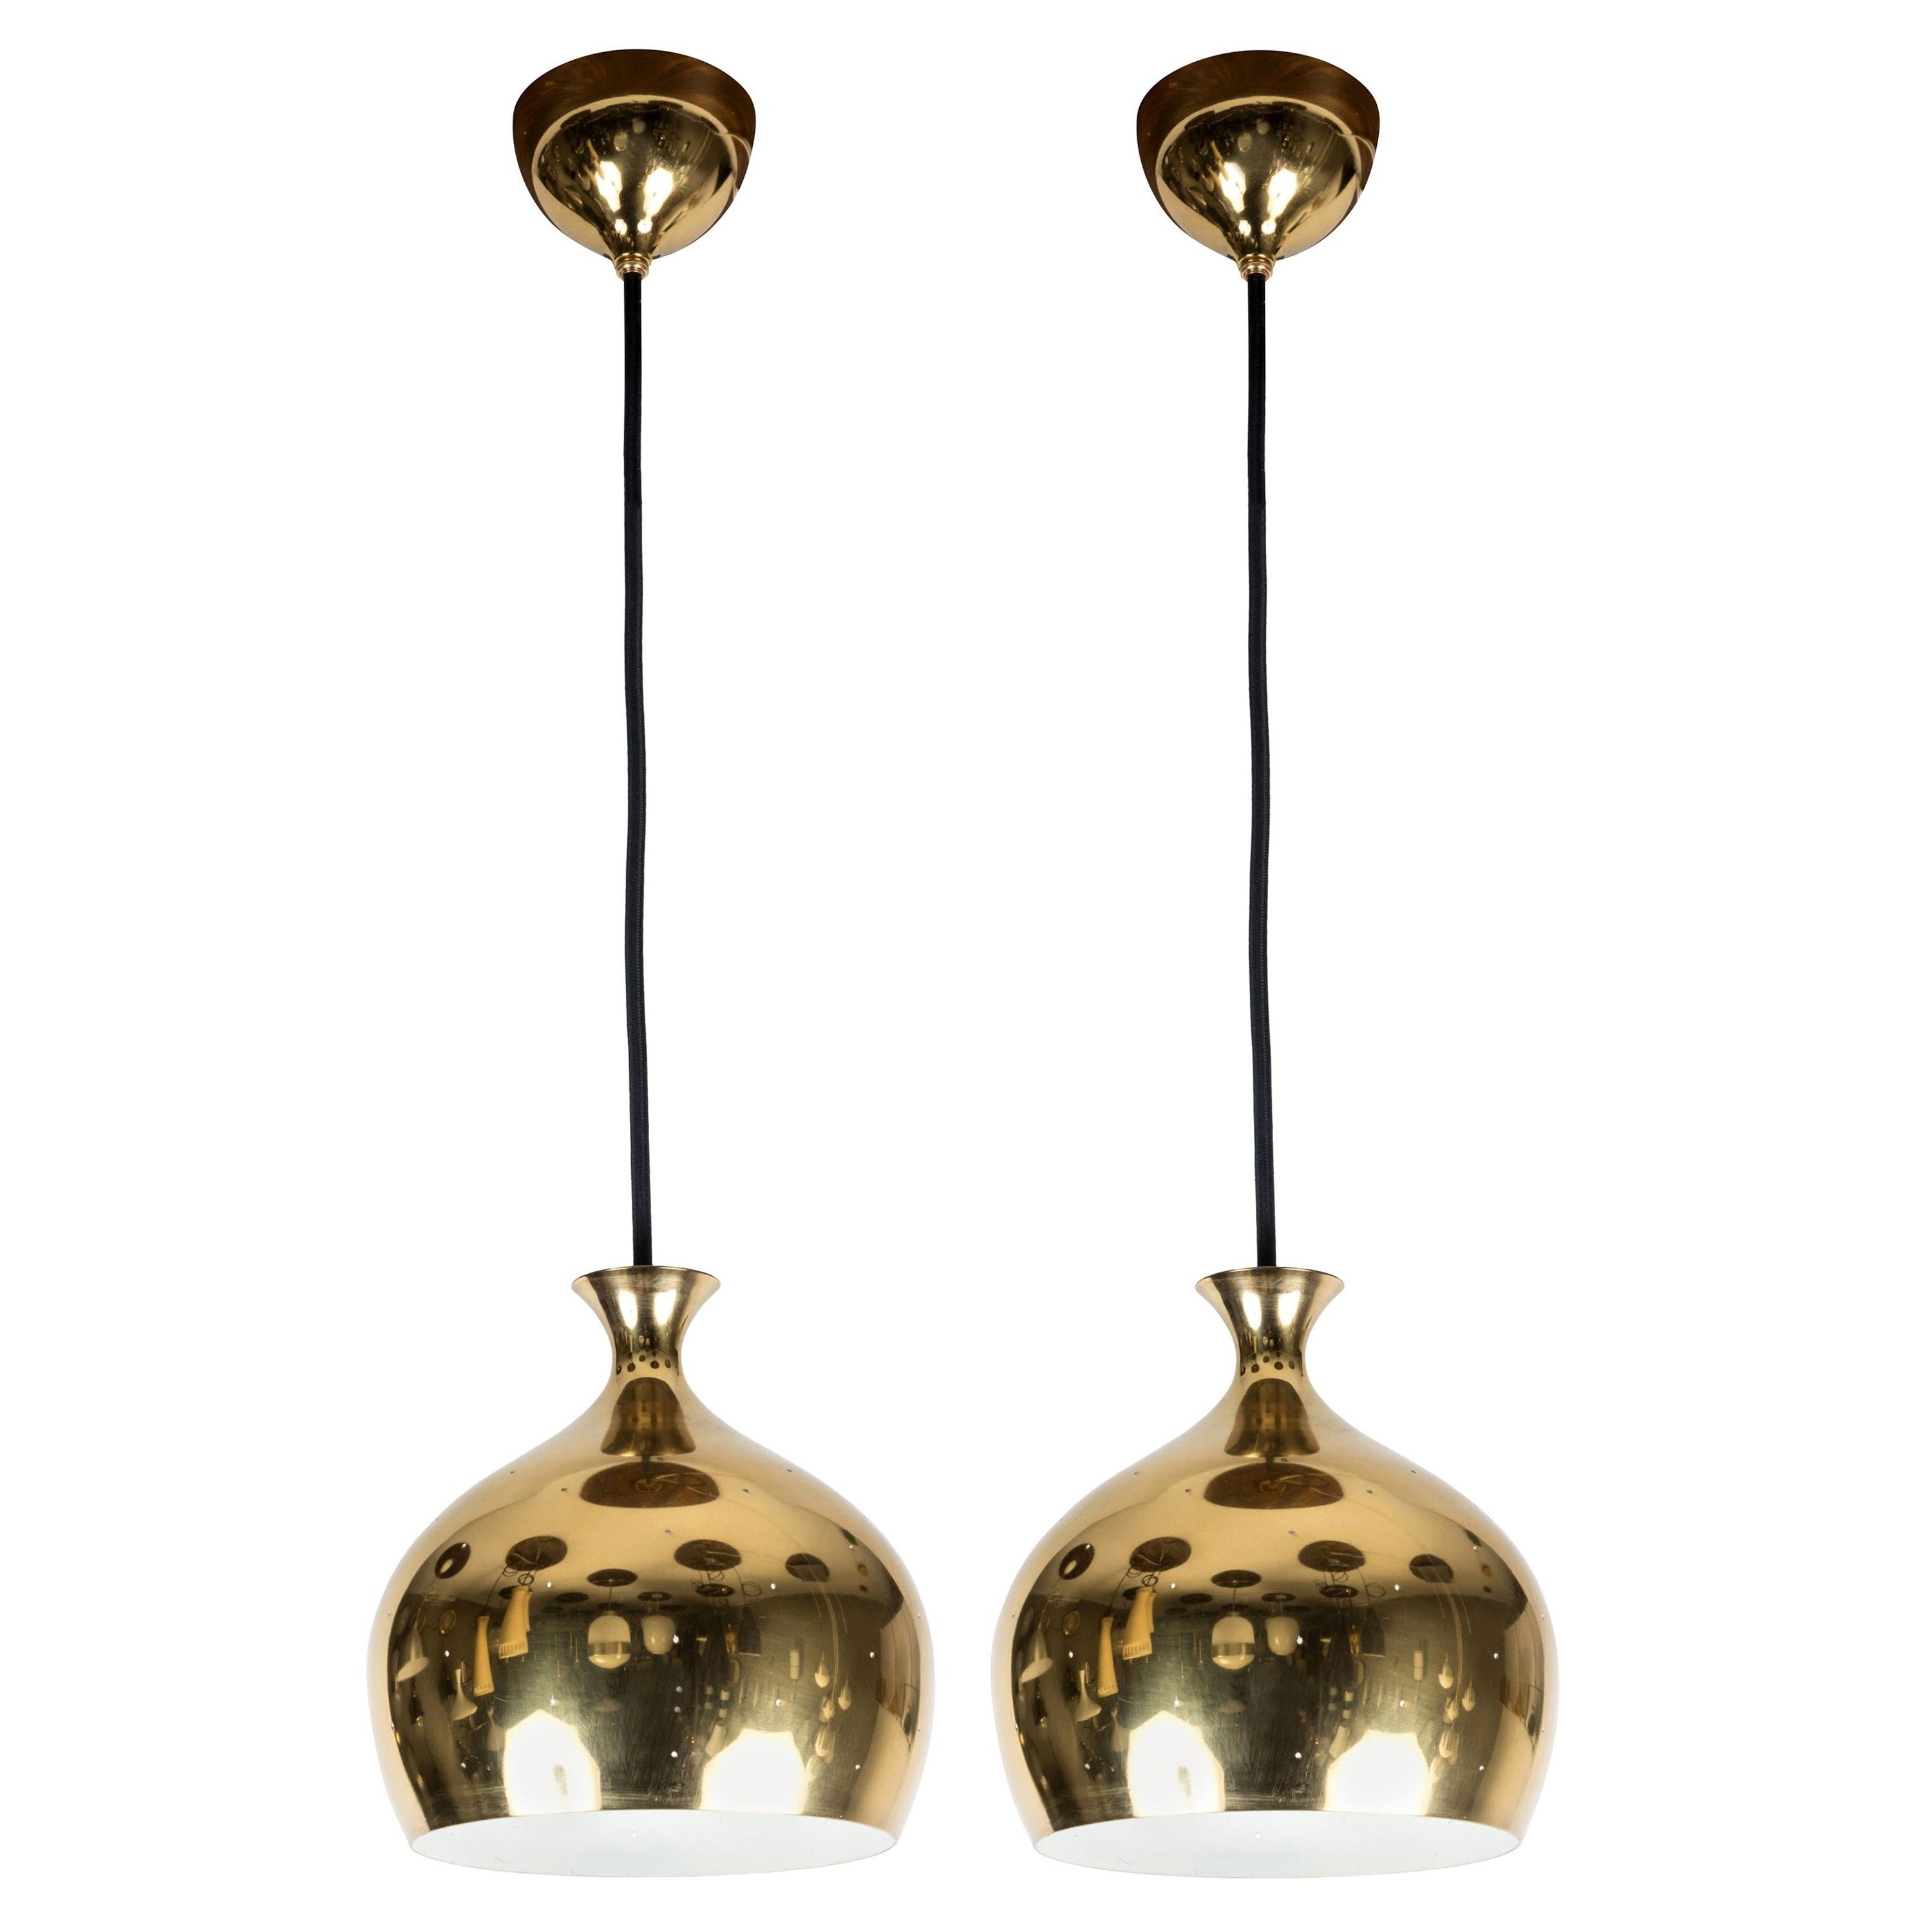 1960s Brass Perforated 'Onion' Pendants by Helge Zimdal for Falkenberg